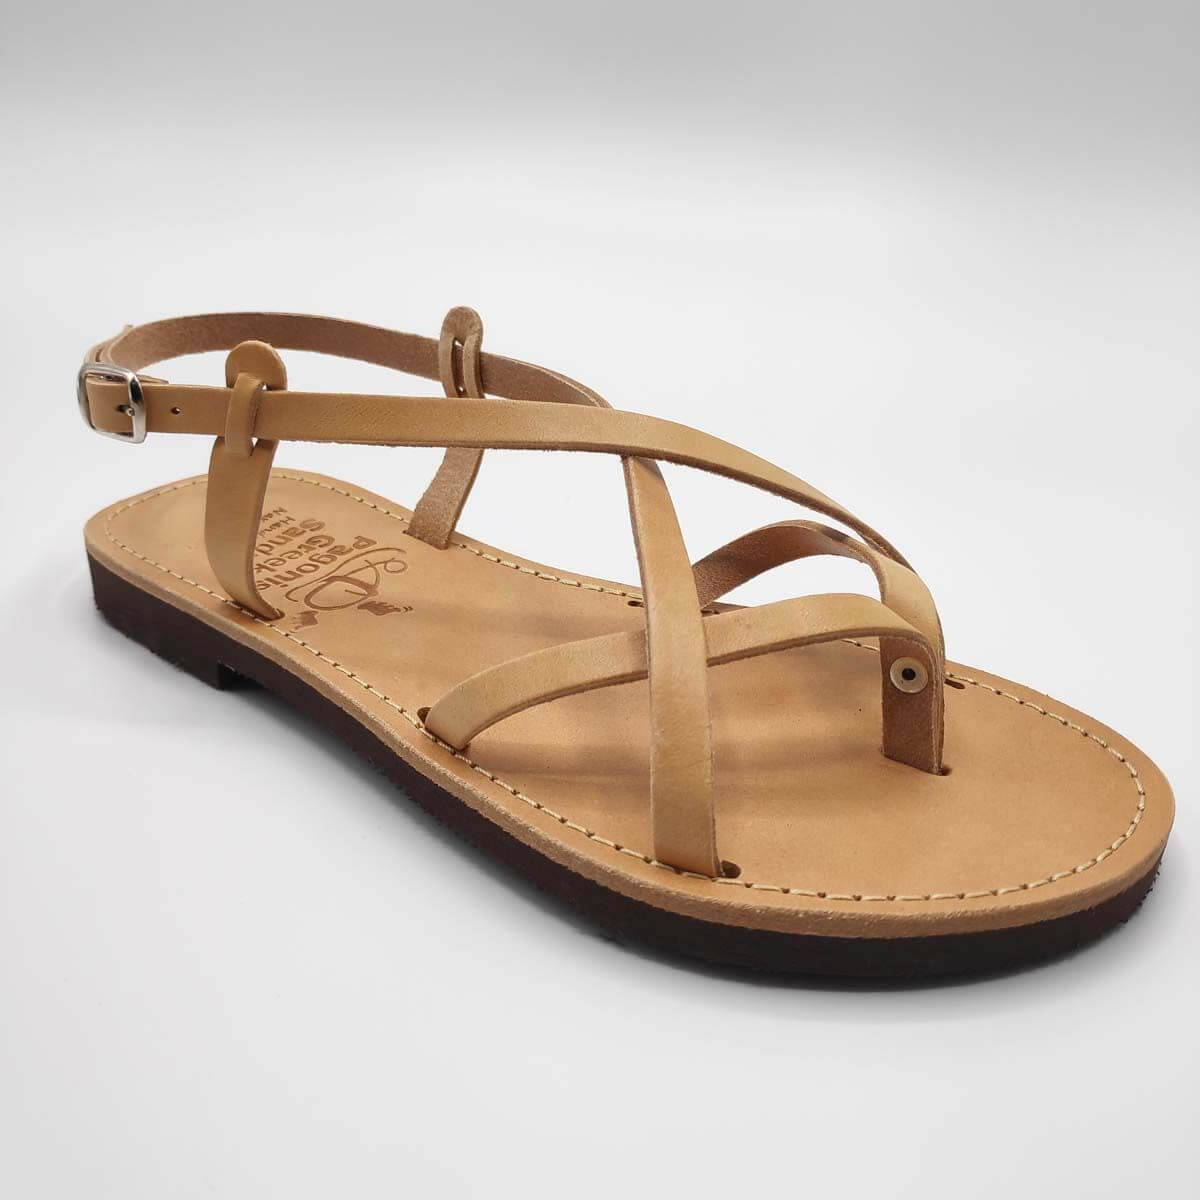 Leather Flip Flop Sandal strappy sandals with toe divider | Pagonis ...